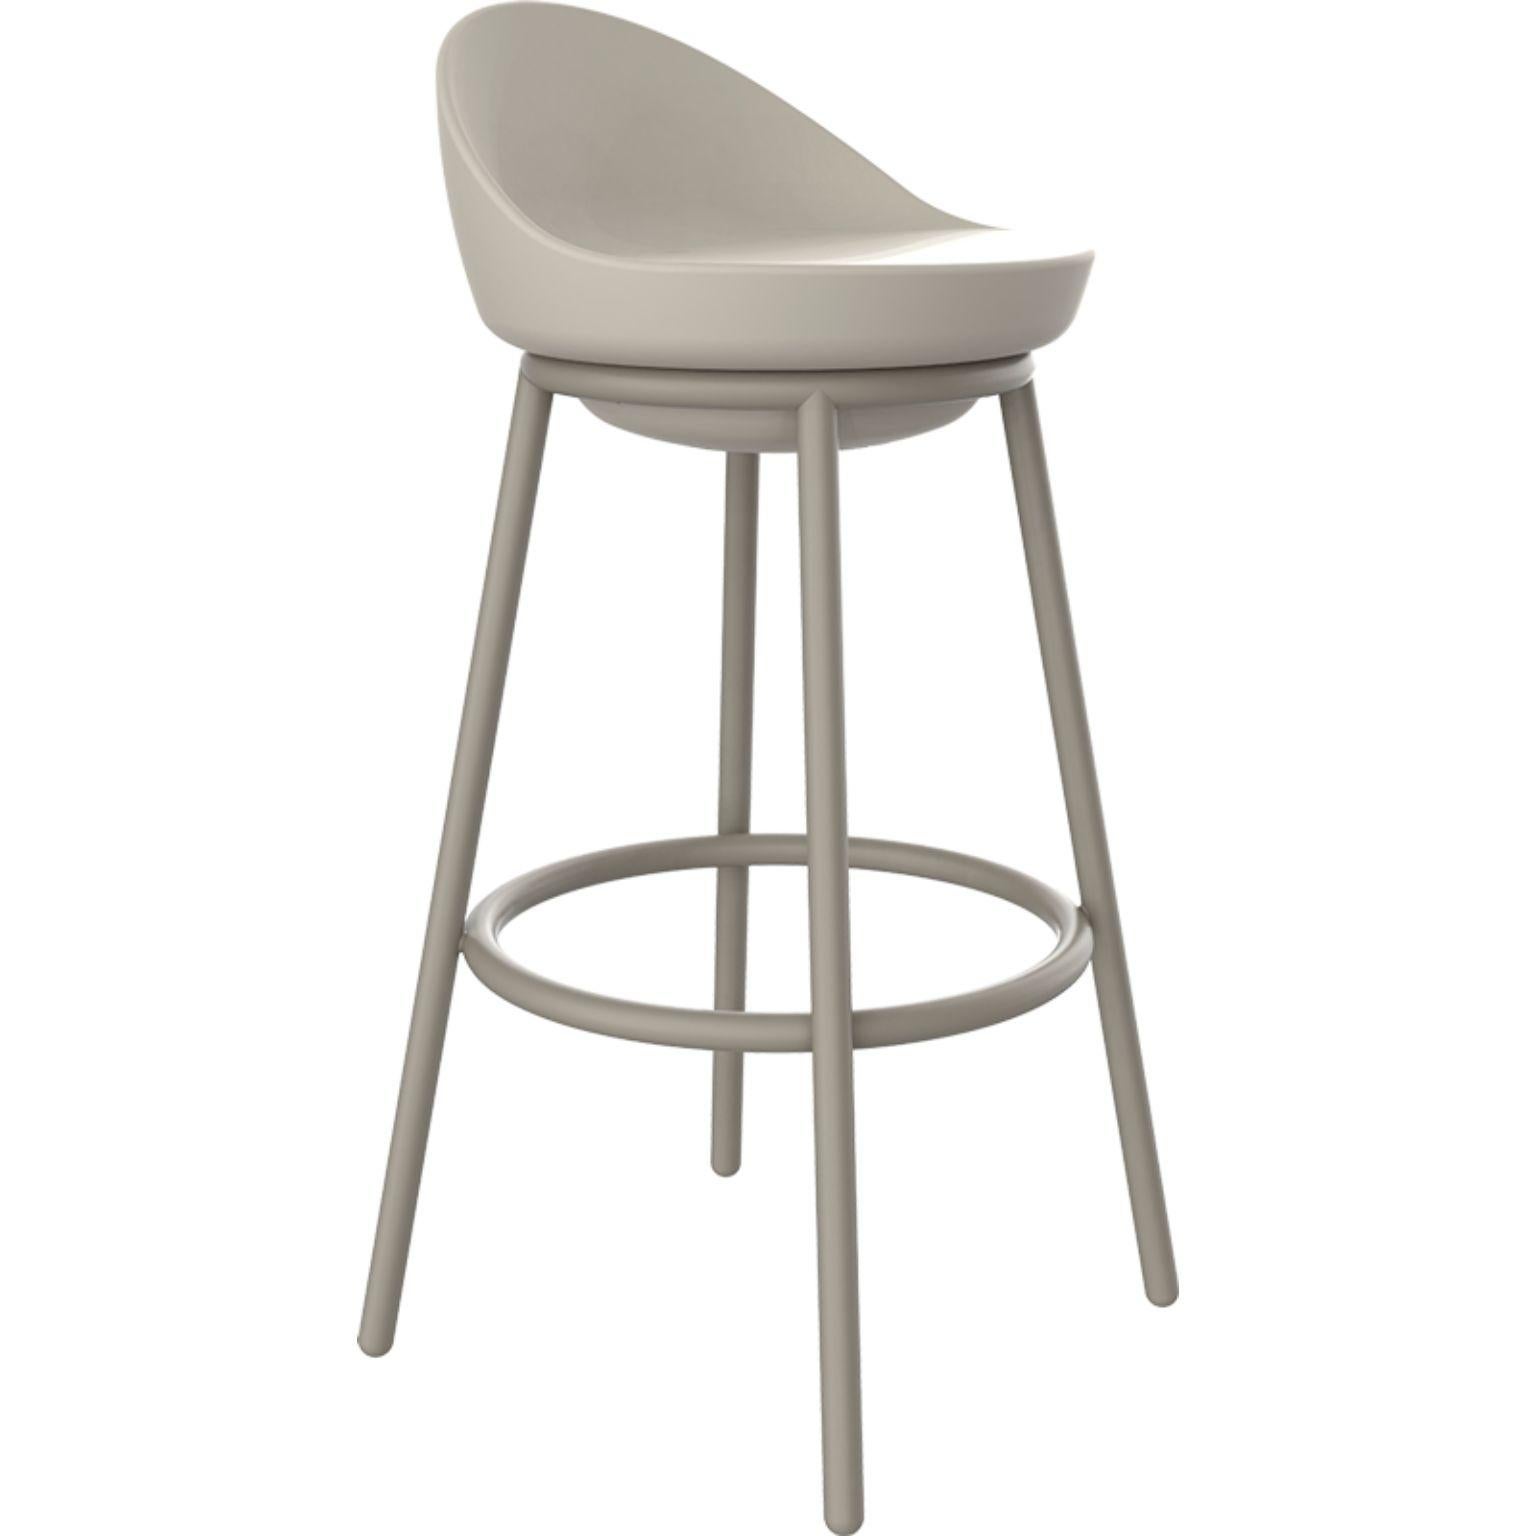 Lace cream stool by MOWEE.
Dimensions: D43 x H91 cm.
Material: polyethylene, stainless steel.
Weight: 6.7 kg
Also available in different colours and finishes.

Lace is a collection of furniture made by rotomoulding. Its shape resembles a